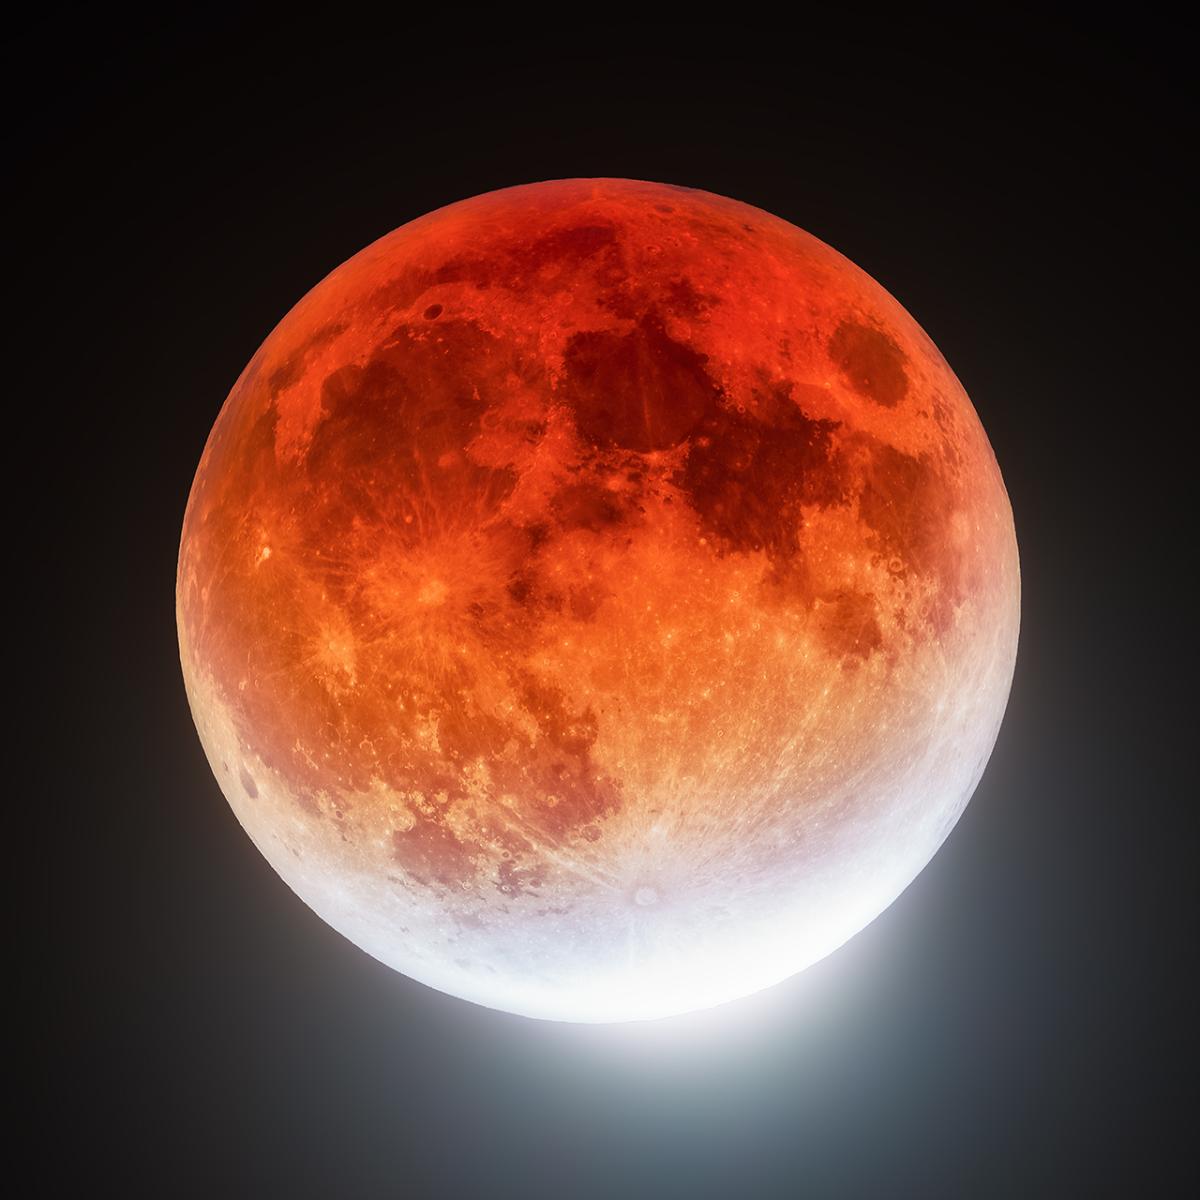 The Moon during an eclipse, lit up a deep orange colour with the white light of the Sun just visible on the bottom right hand side